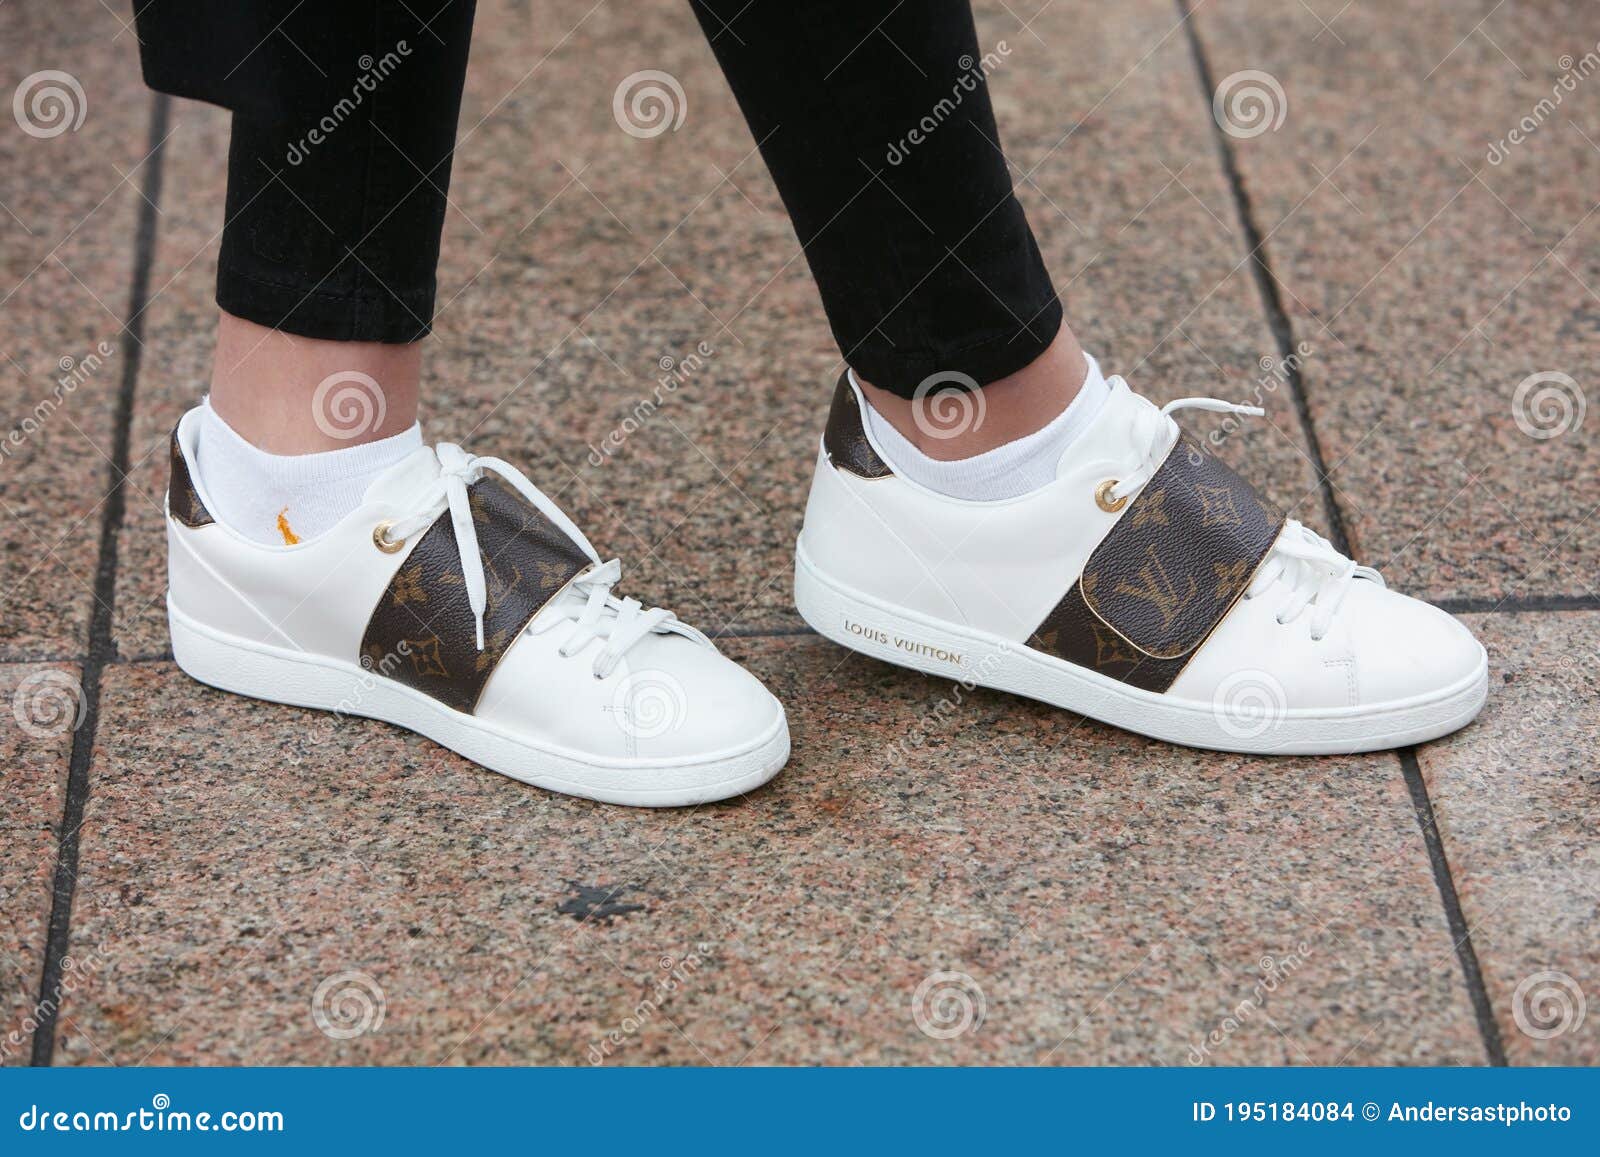 eftertænksom tælle sagging Woman with White Louis Vuitton Shoes before Cristiano Burani Fashion Show,  Milan Fashion Week Street Style on Editorial Stock Image - Image of week,  outfit: 195184084